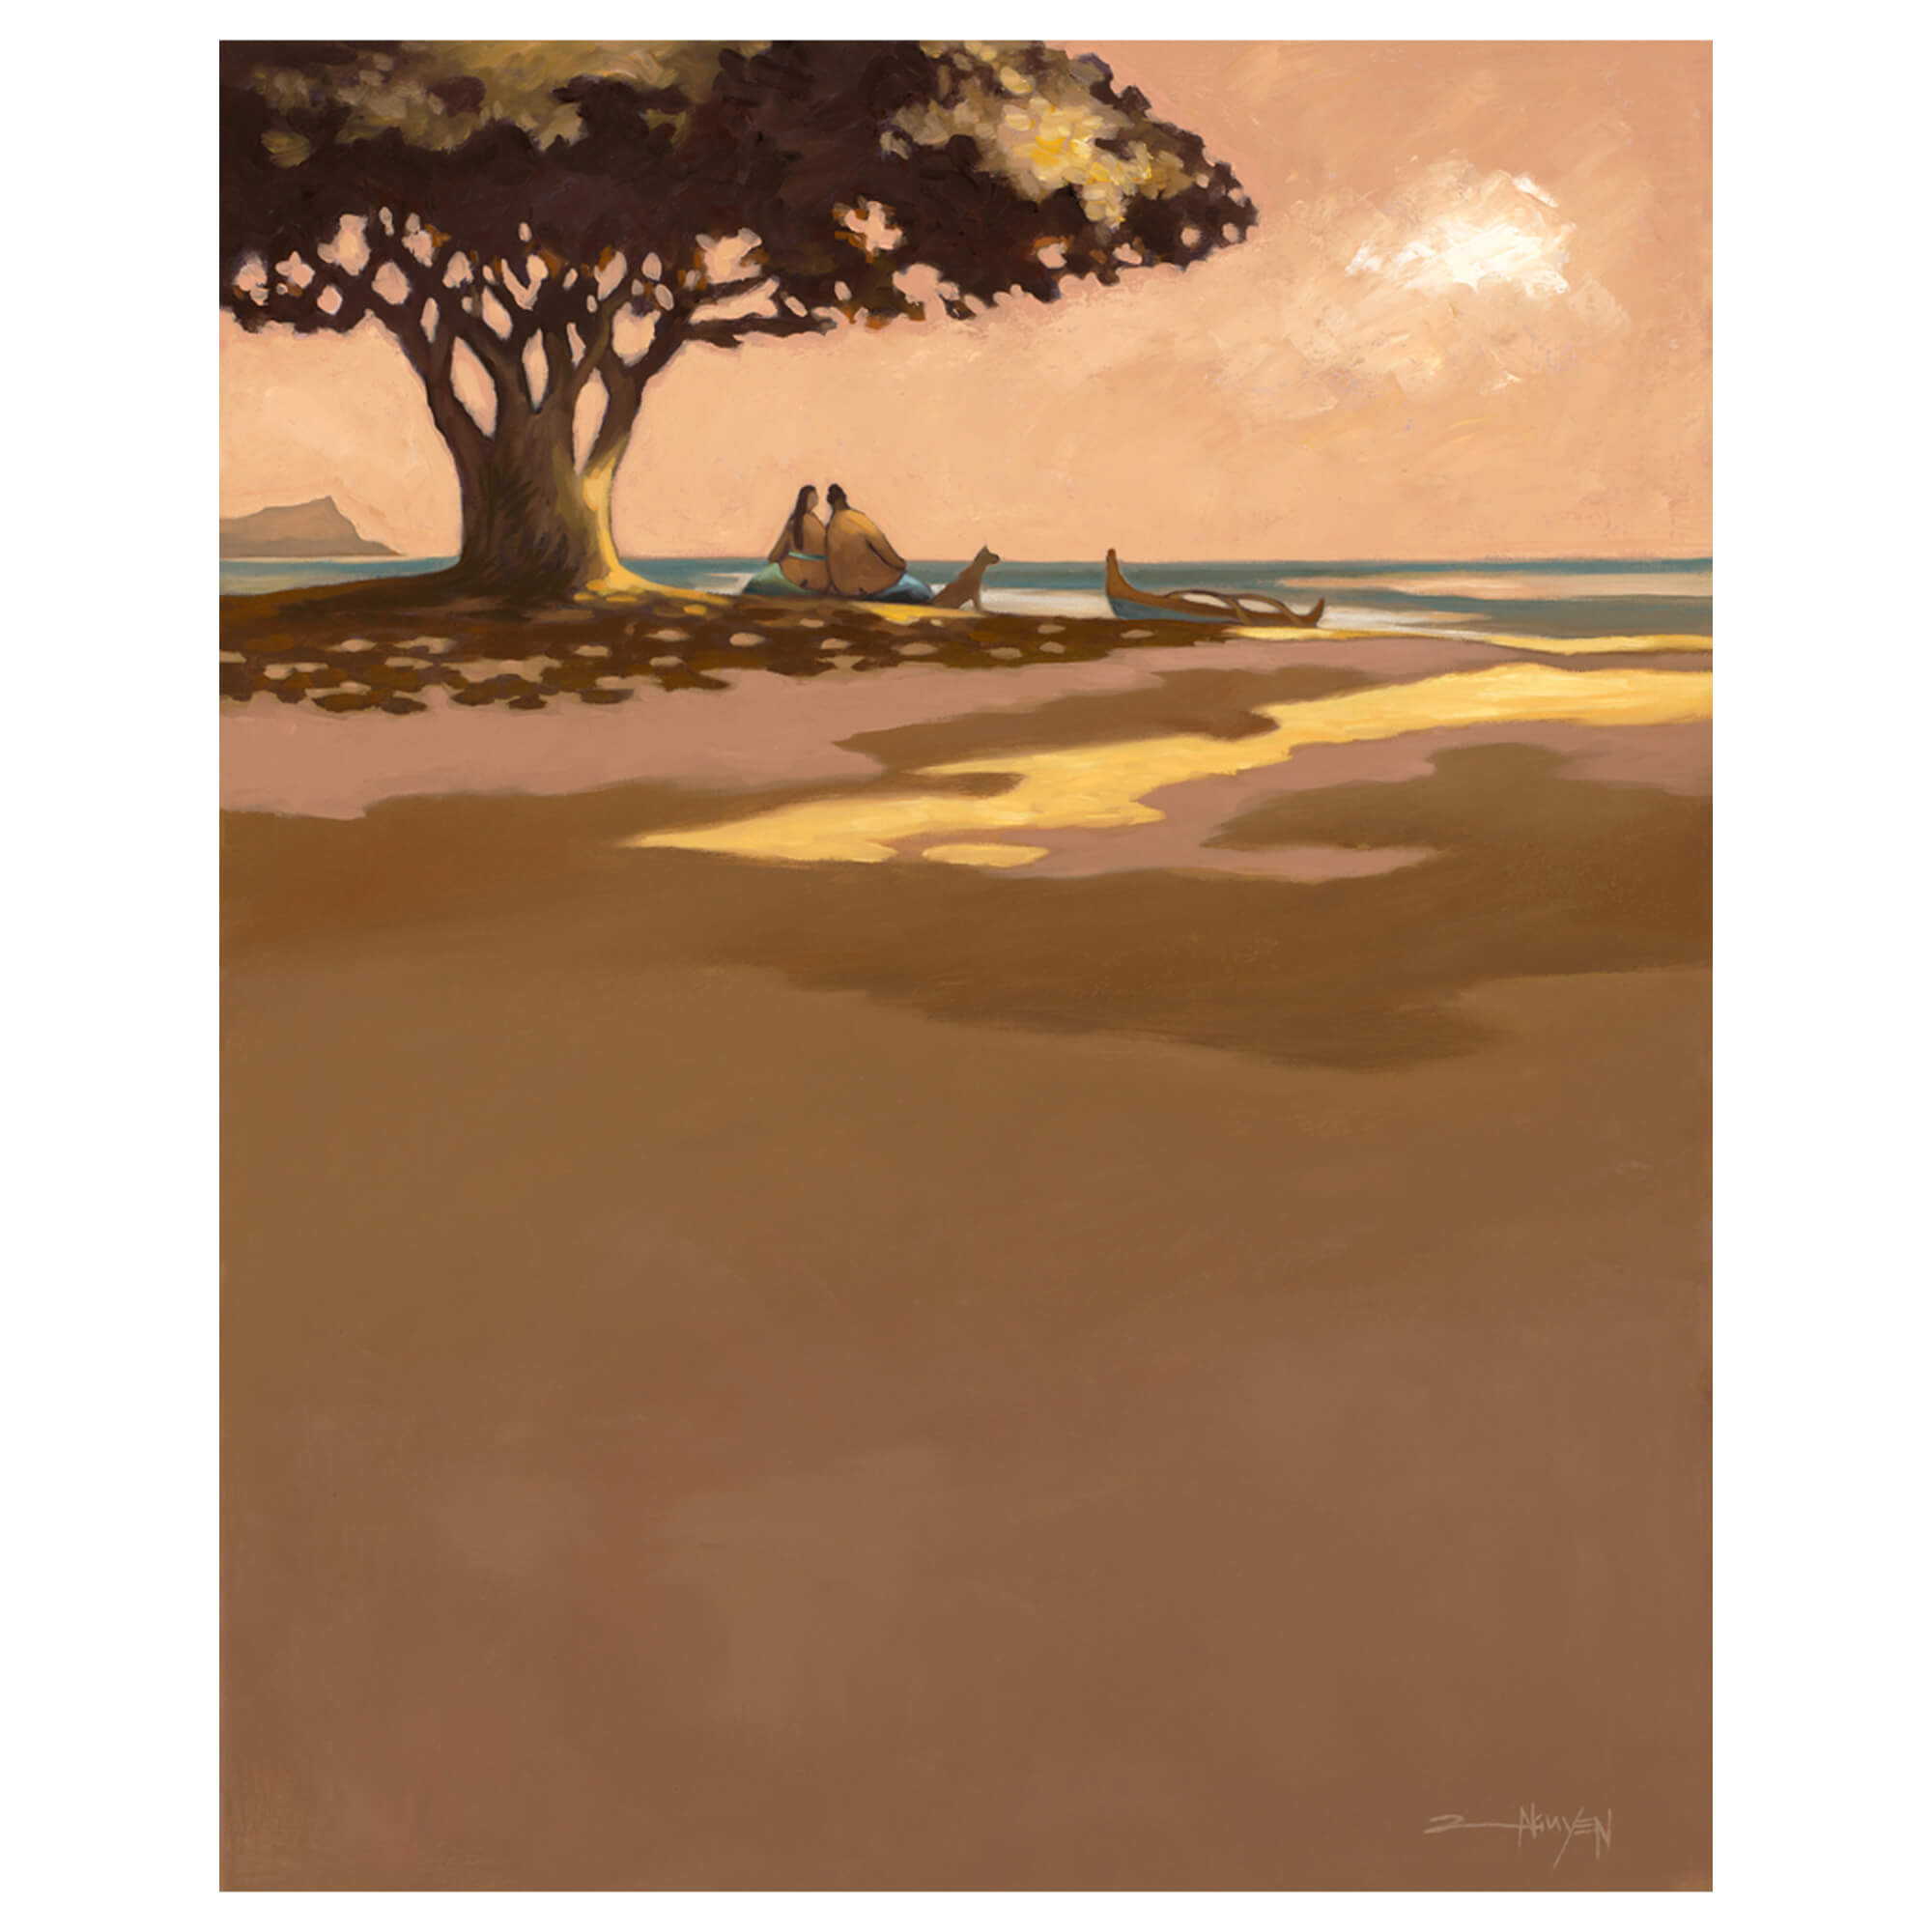 Metal art print of a couple enjoying the sunset view at the beach under a tree by Hawaii artist Tim Nguyen